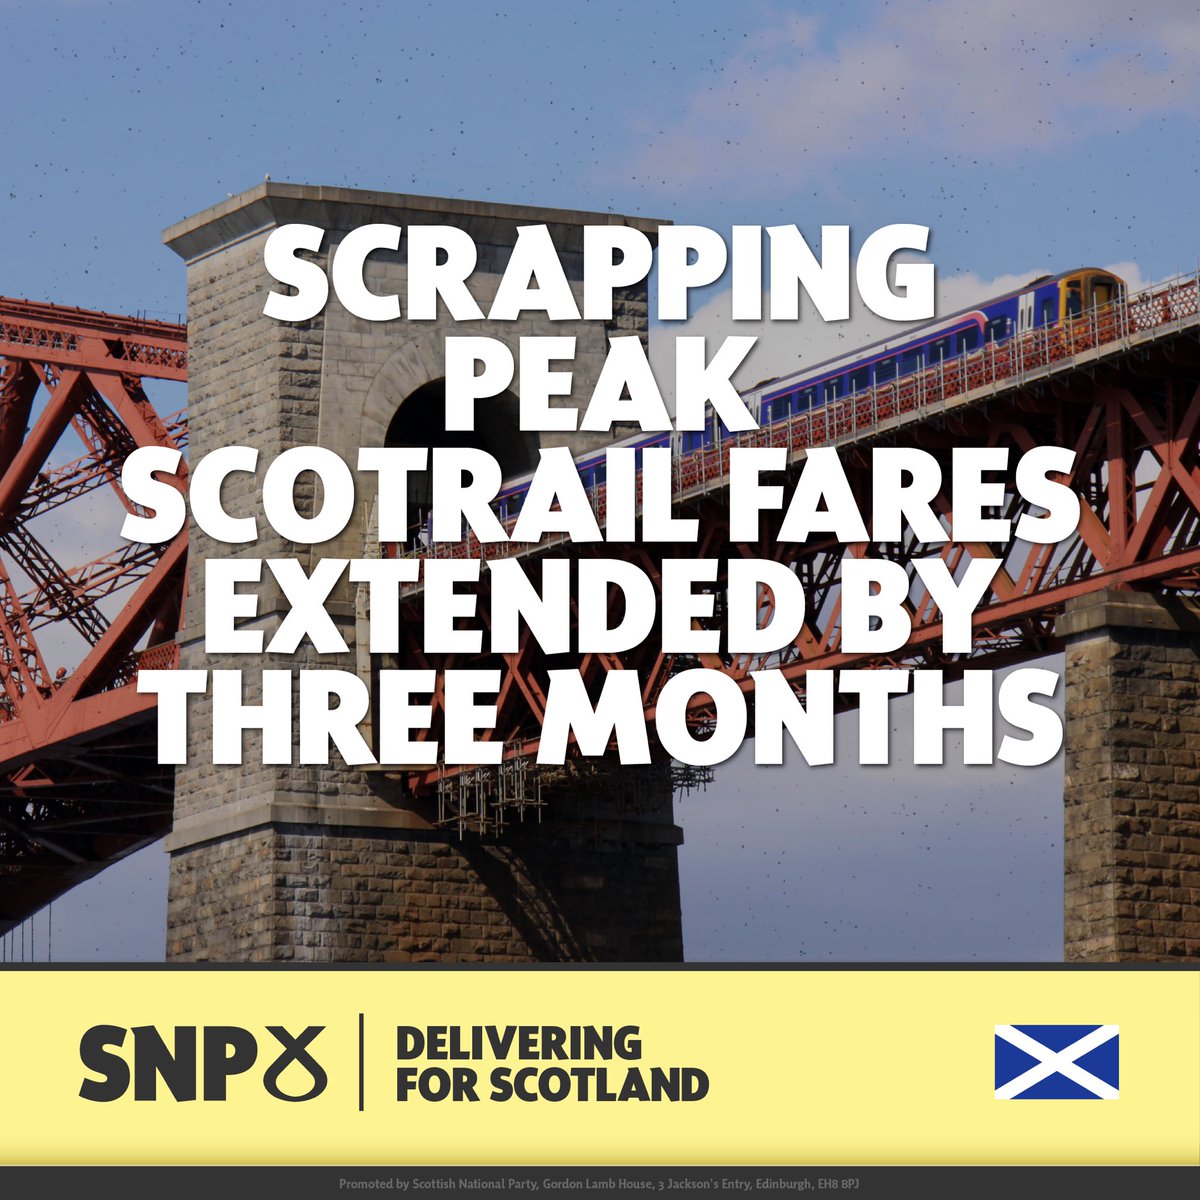 🚋 The trial of scrapping peak-time ScotRail fares has been extended by 3 months. 🎟️ The scheme saw the cost of a rush hour ticket between Glasgow and Edinburgh being nearly halved, from £28.90 down to £14.90 (a monthly Monday to Friday saving of £280).